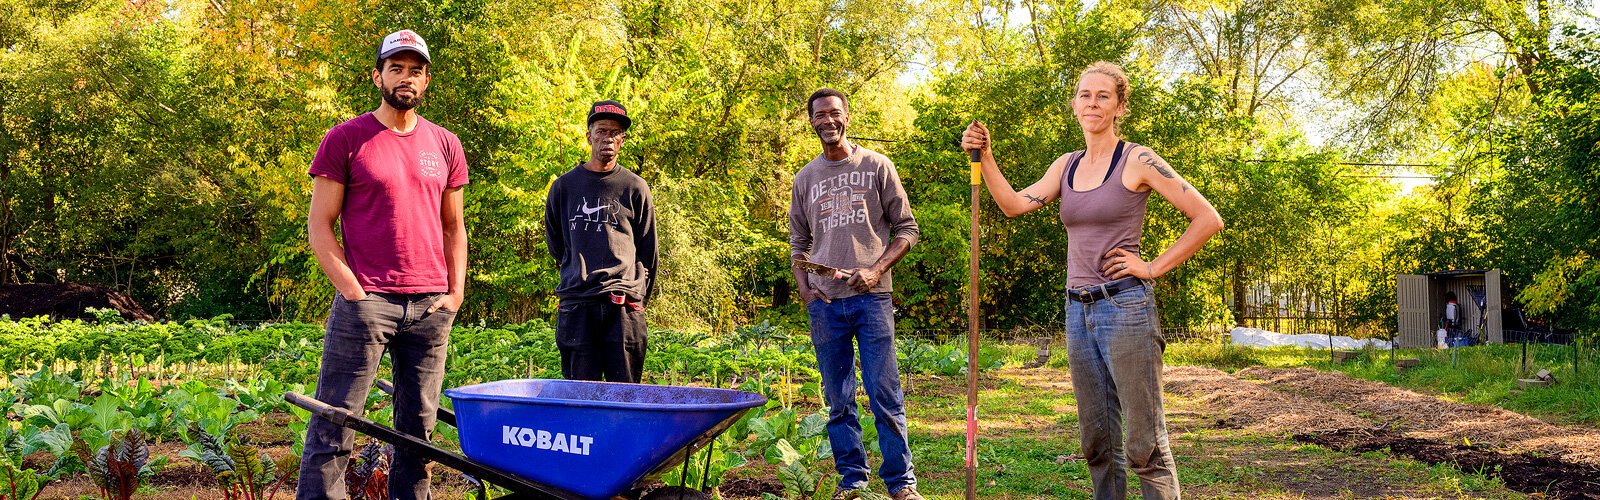 Ahmad al-Basir, Valaxquerez Bush, Melvin Parson, and Marly Spieser-Schneider at We The People Opportunity Farm.